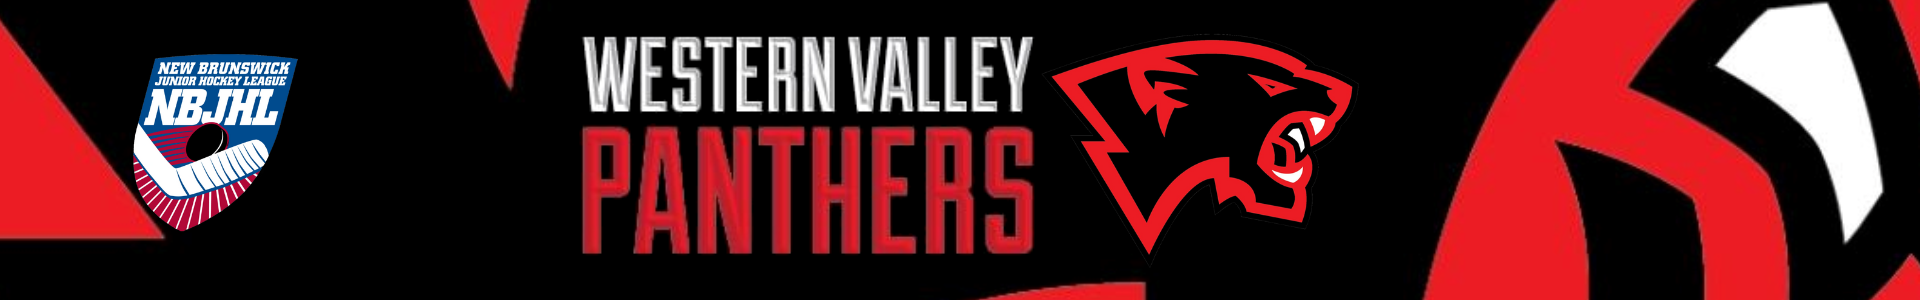 Western Valley Panthers